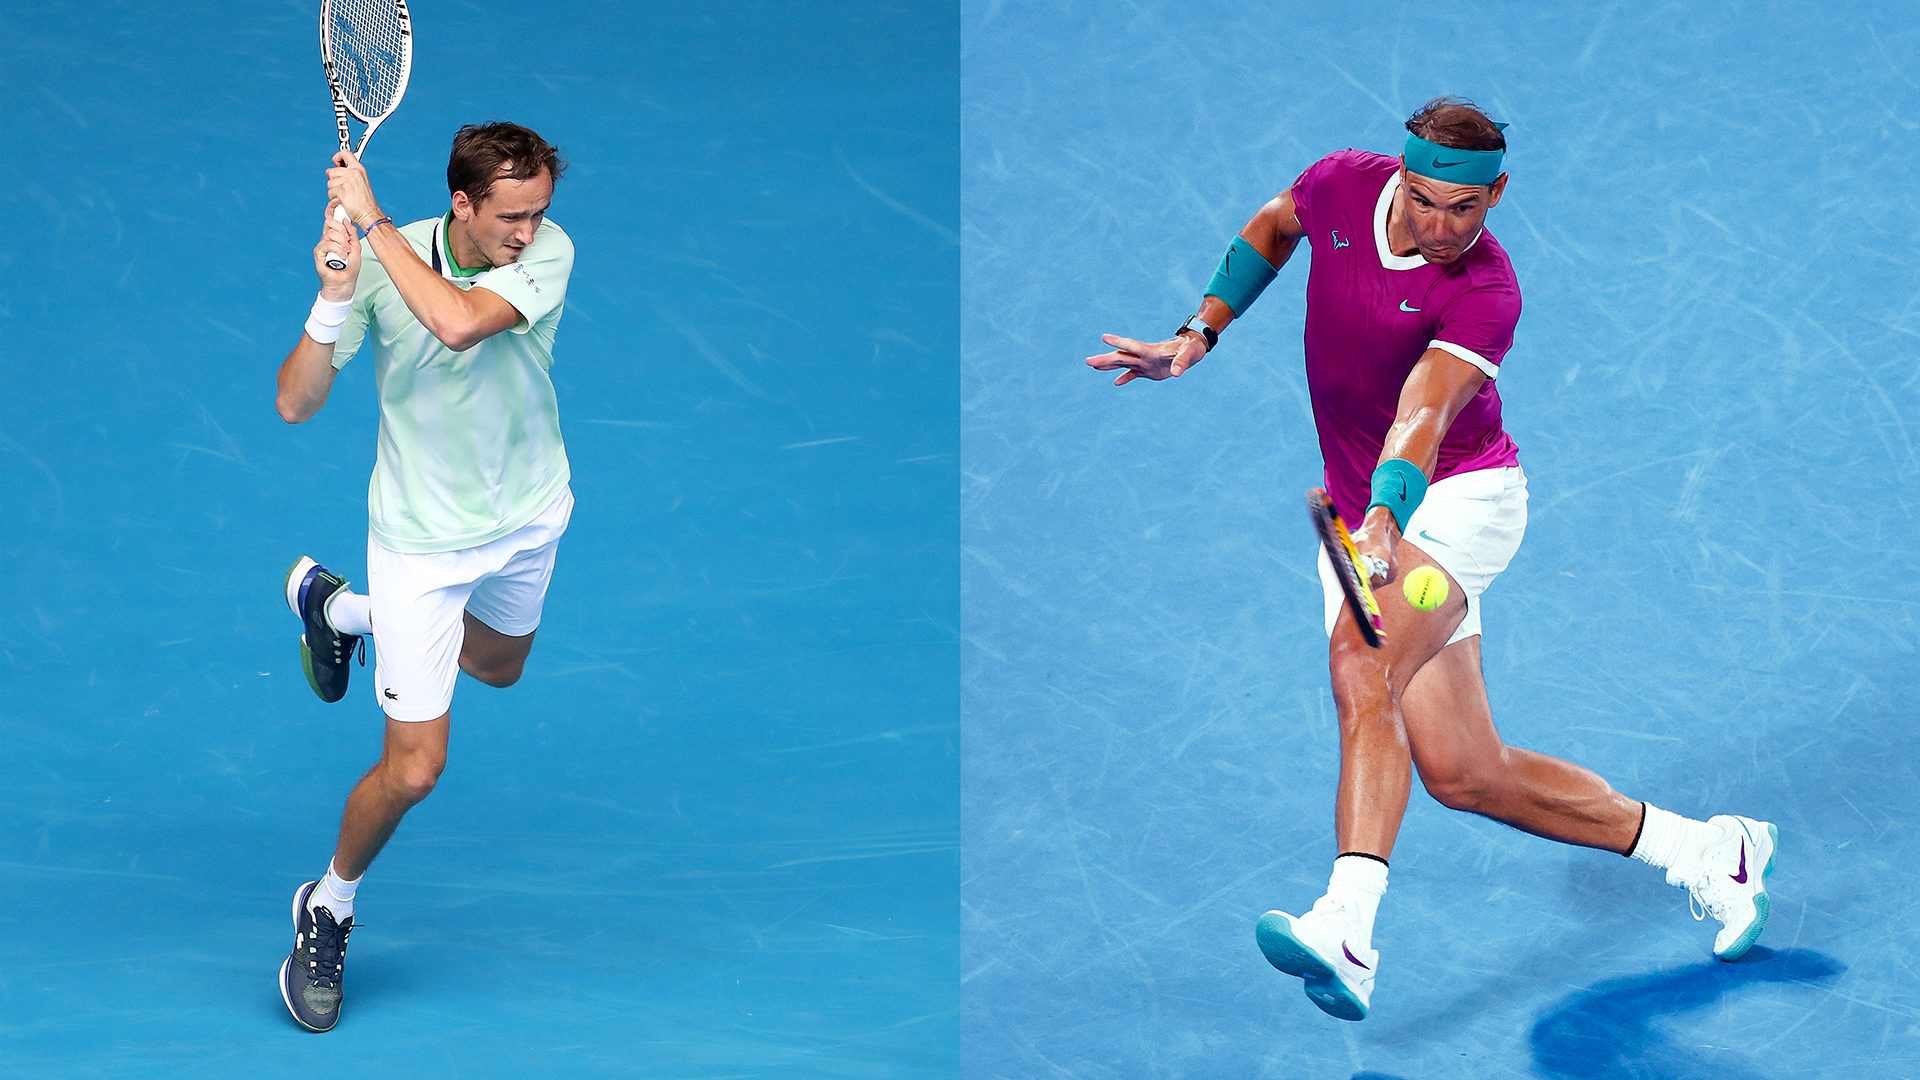 Rafael Nadal v Daniil Medvedev Australian Open final guide, head-to-head, Grand Slam records, career stats, betting odds, how to watch on TV and start time